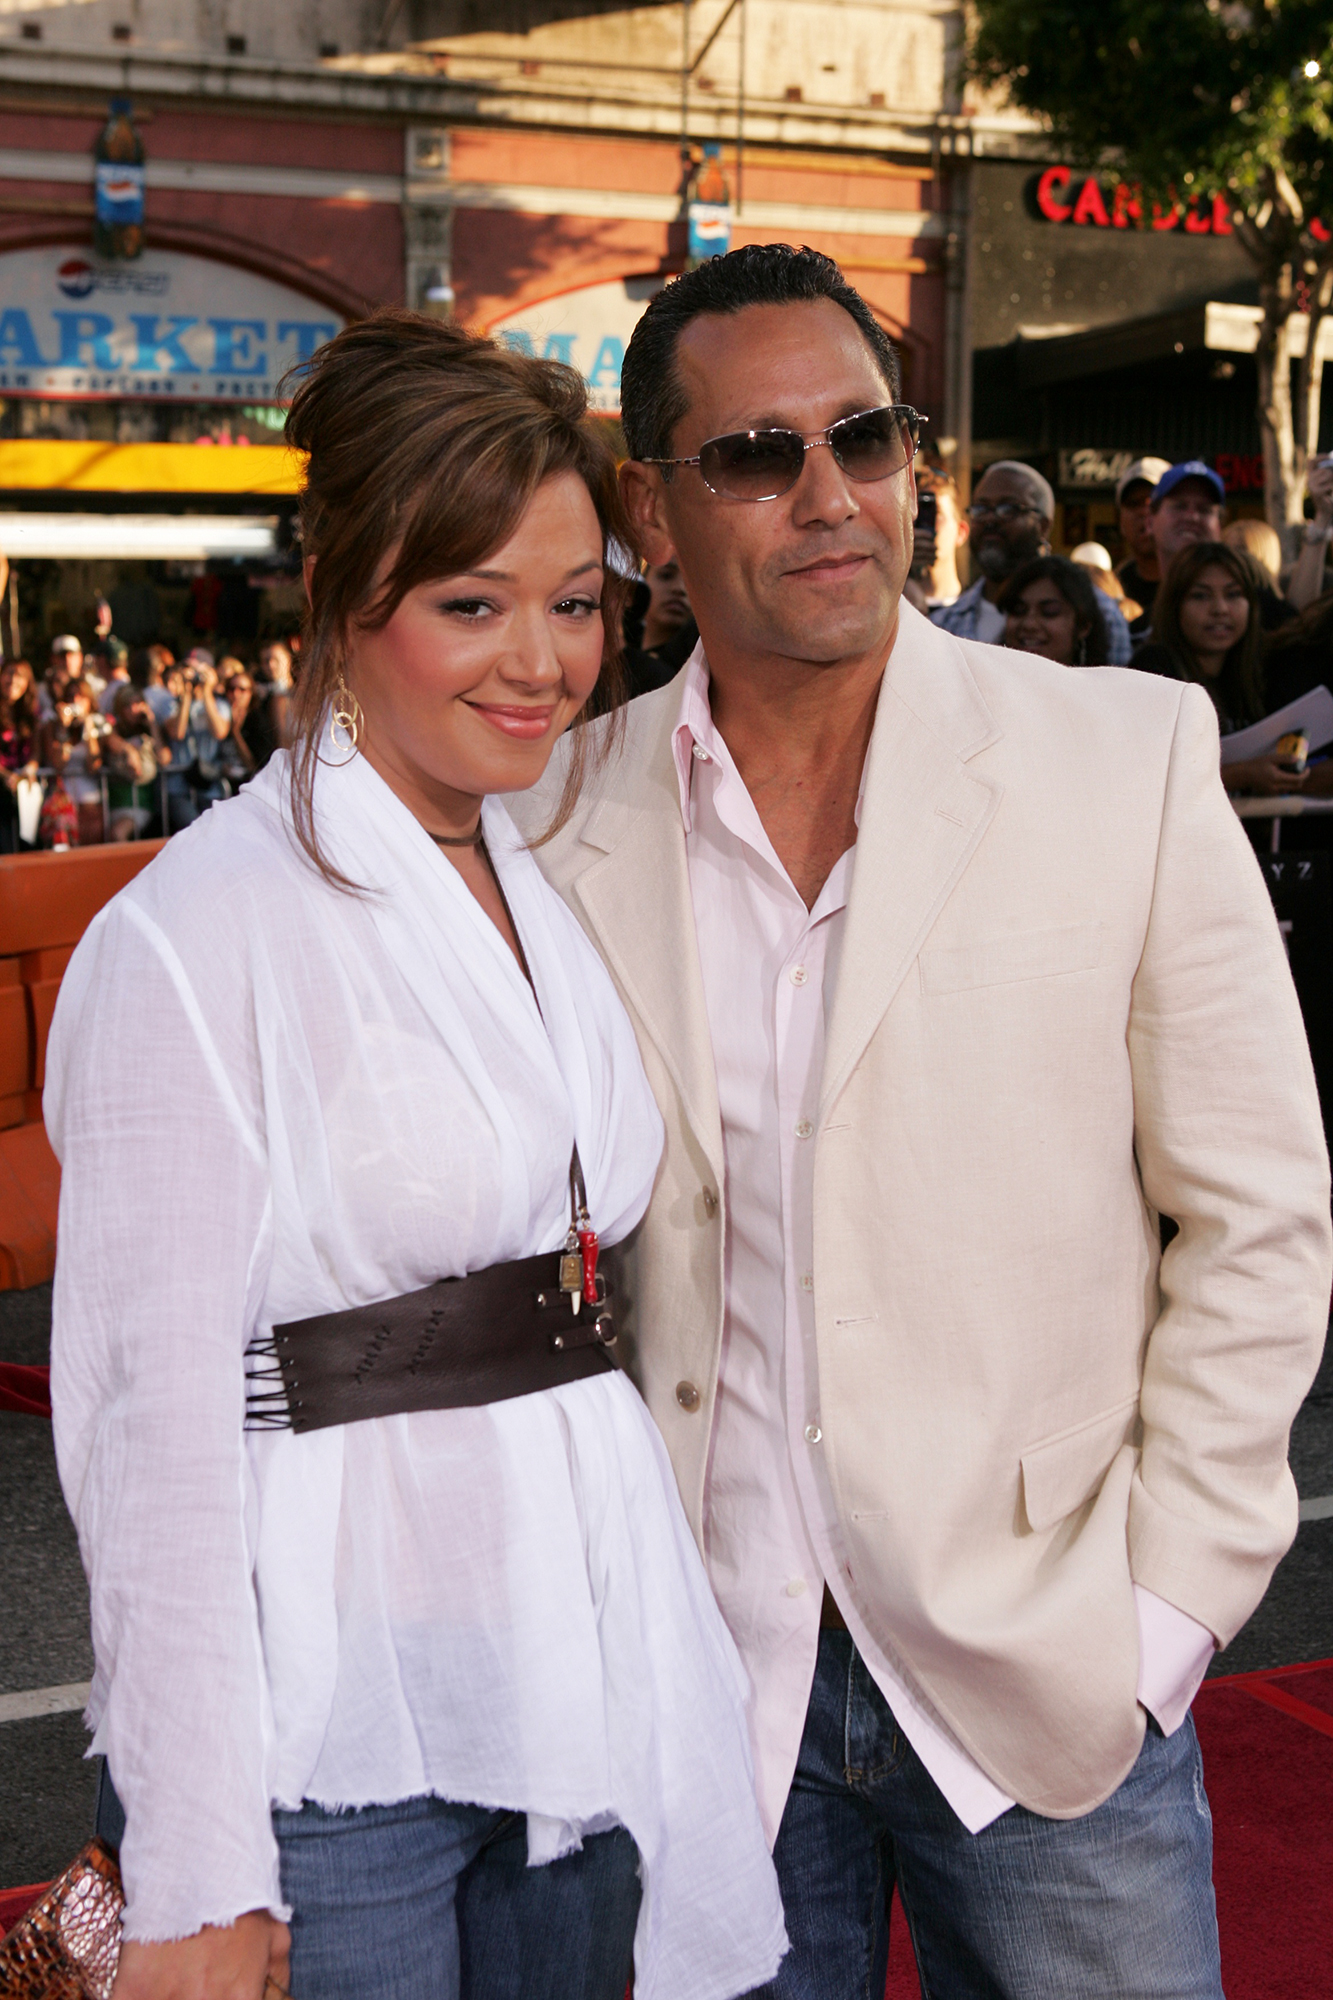 Angelo Pagan wearing  mocha colored coat and Leah Remini wearing a white long sleeves polo